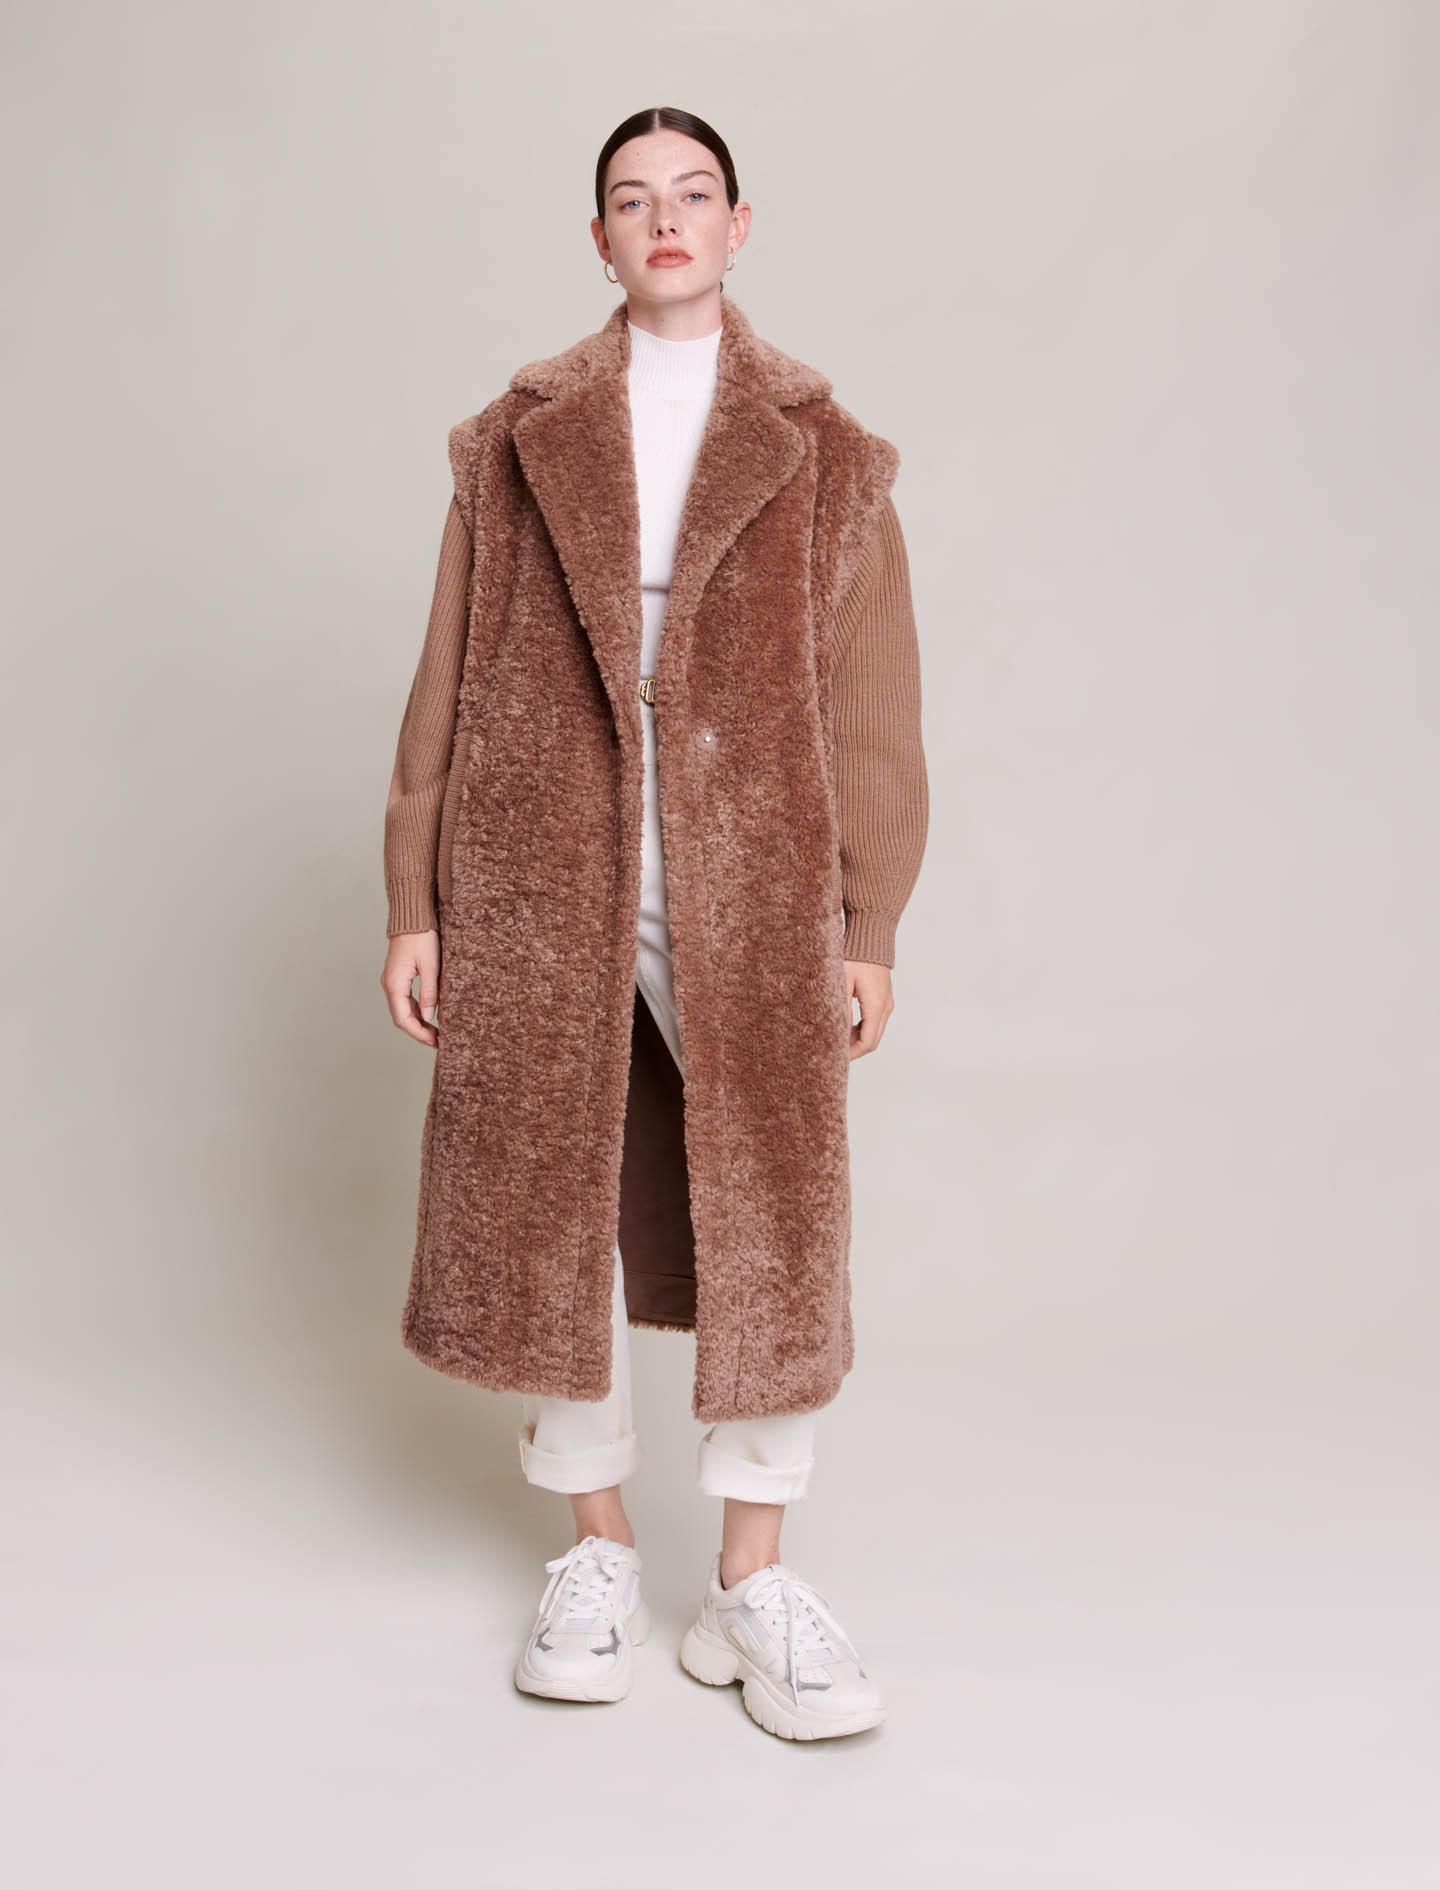 Maje Woman's polyester Sleeves: Long faux fur coat for Fall/Winter, in color Brown / Brown